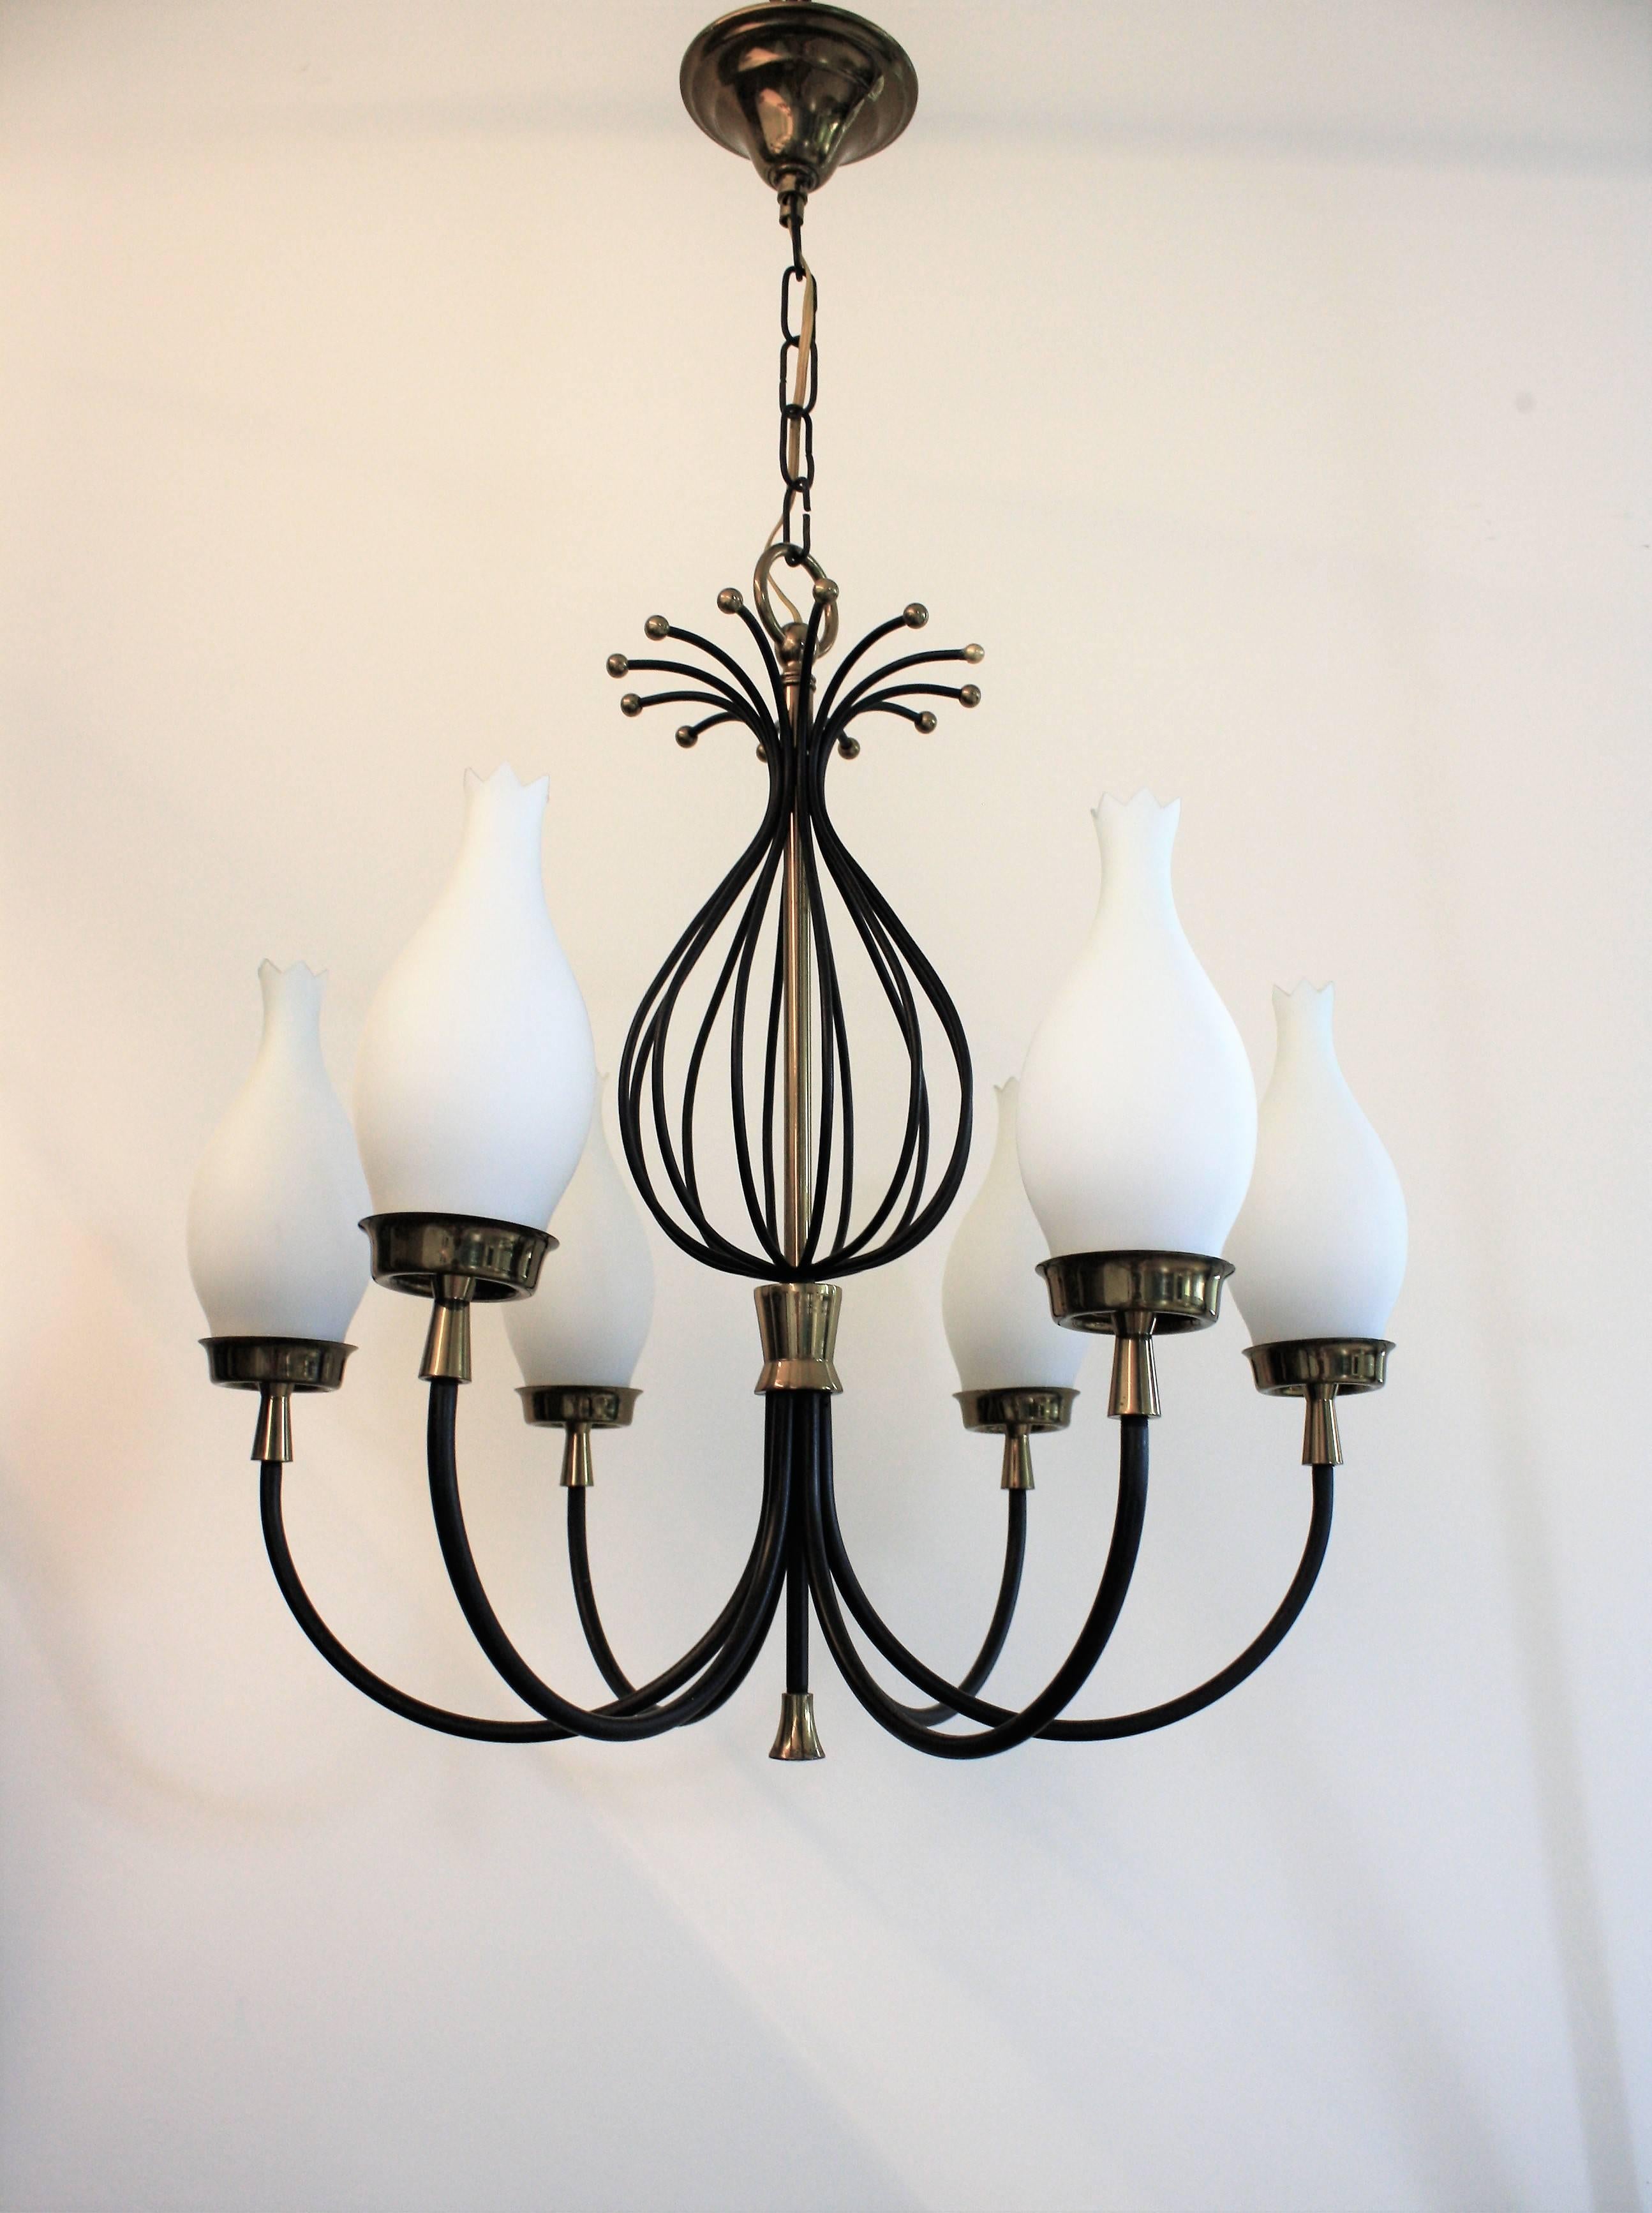 Well designed Italian Stilnovo style chandelier with six arms.

The chandelier is made from black metal with brass shade holders and brass finishes at the bottom and top.

The white glass shades are finely detailed.

1950s, Italy

Tested and